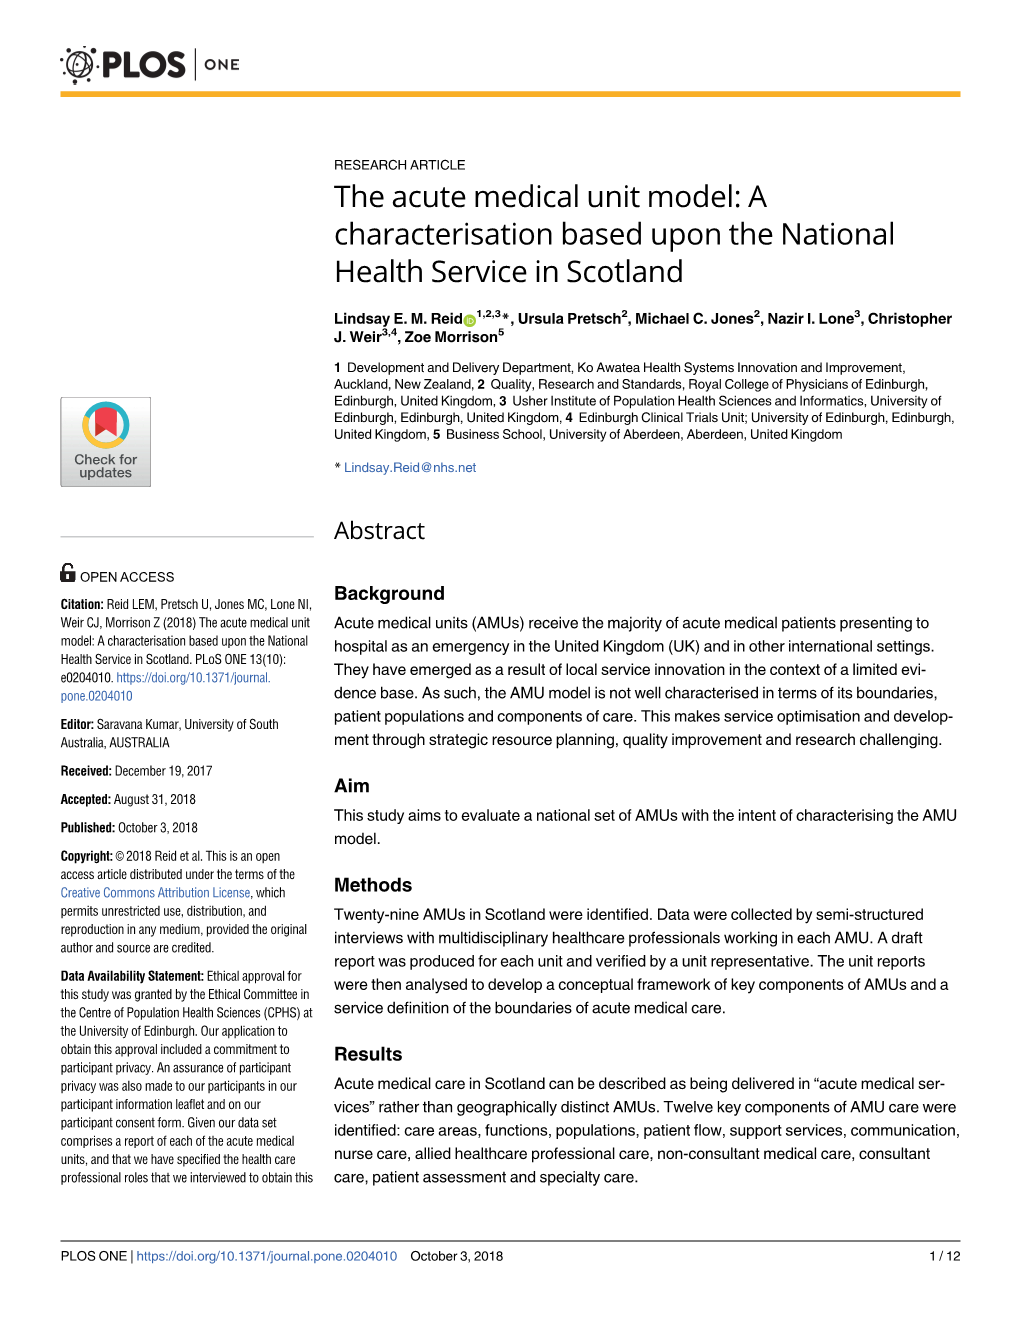 The Acute Medical Unit Model: a Characterisation Based Upon the National Health Service in Scotland